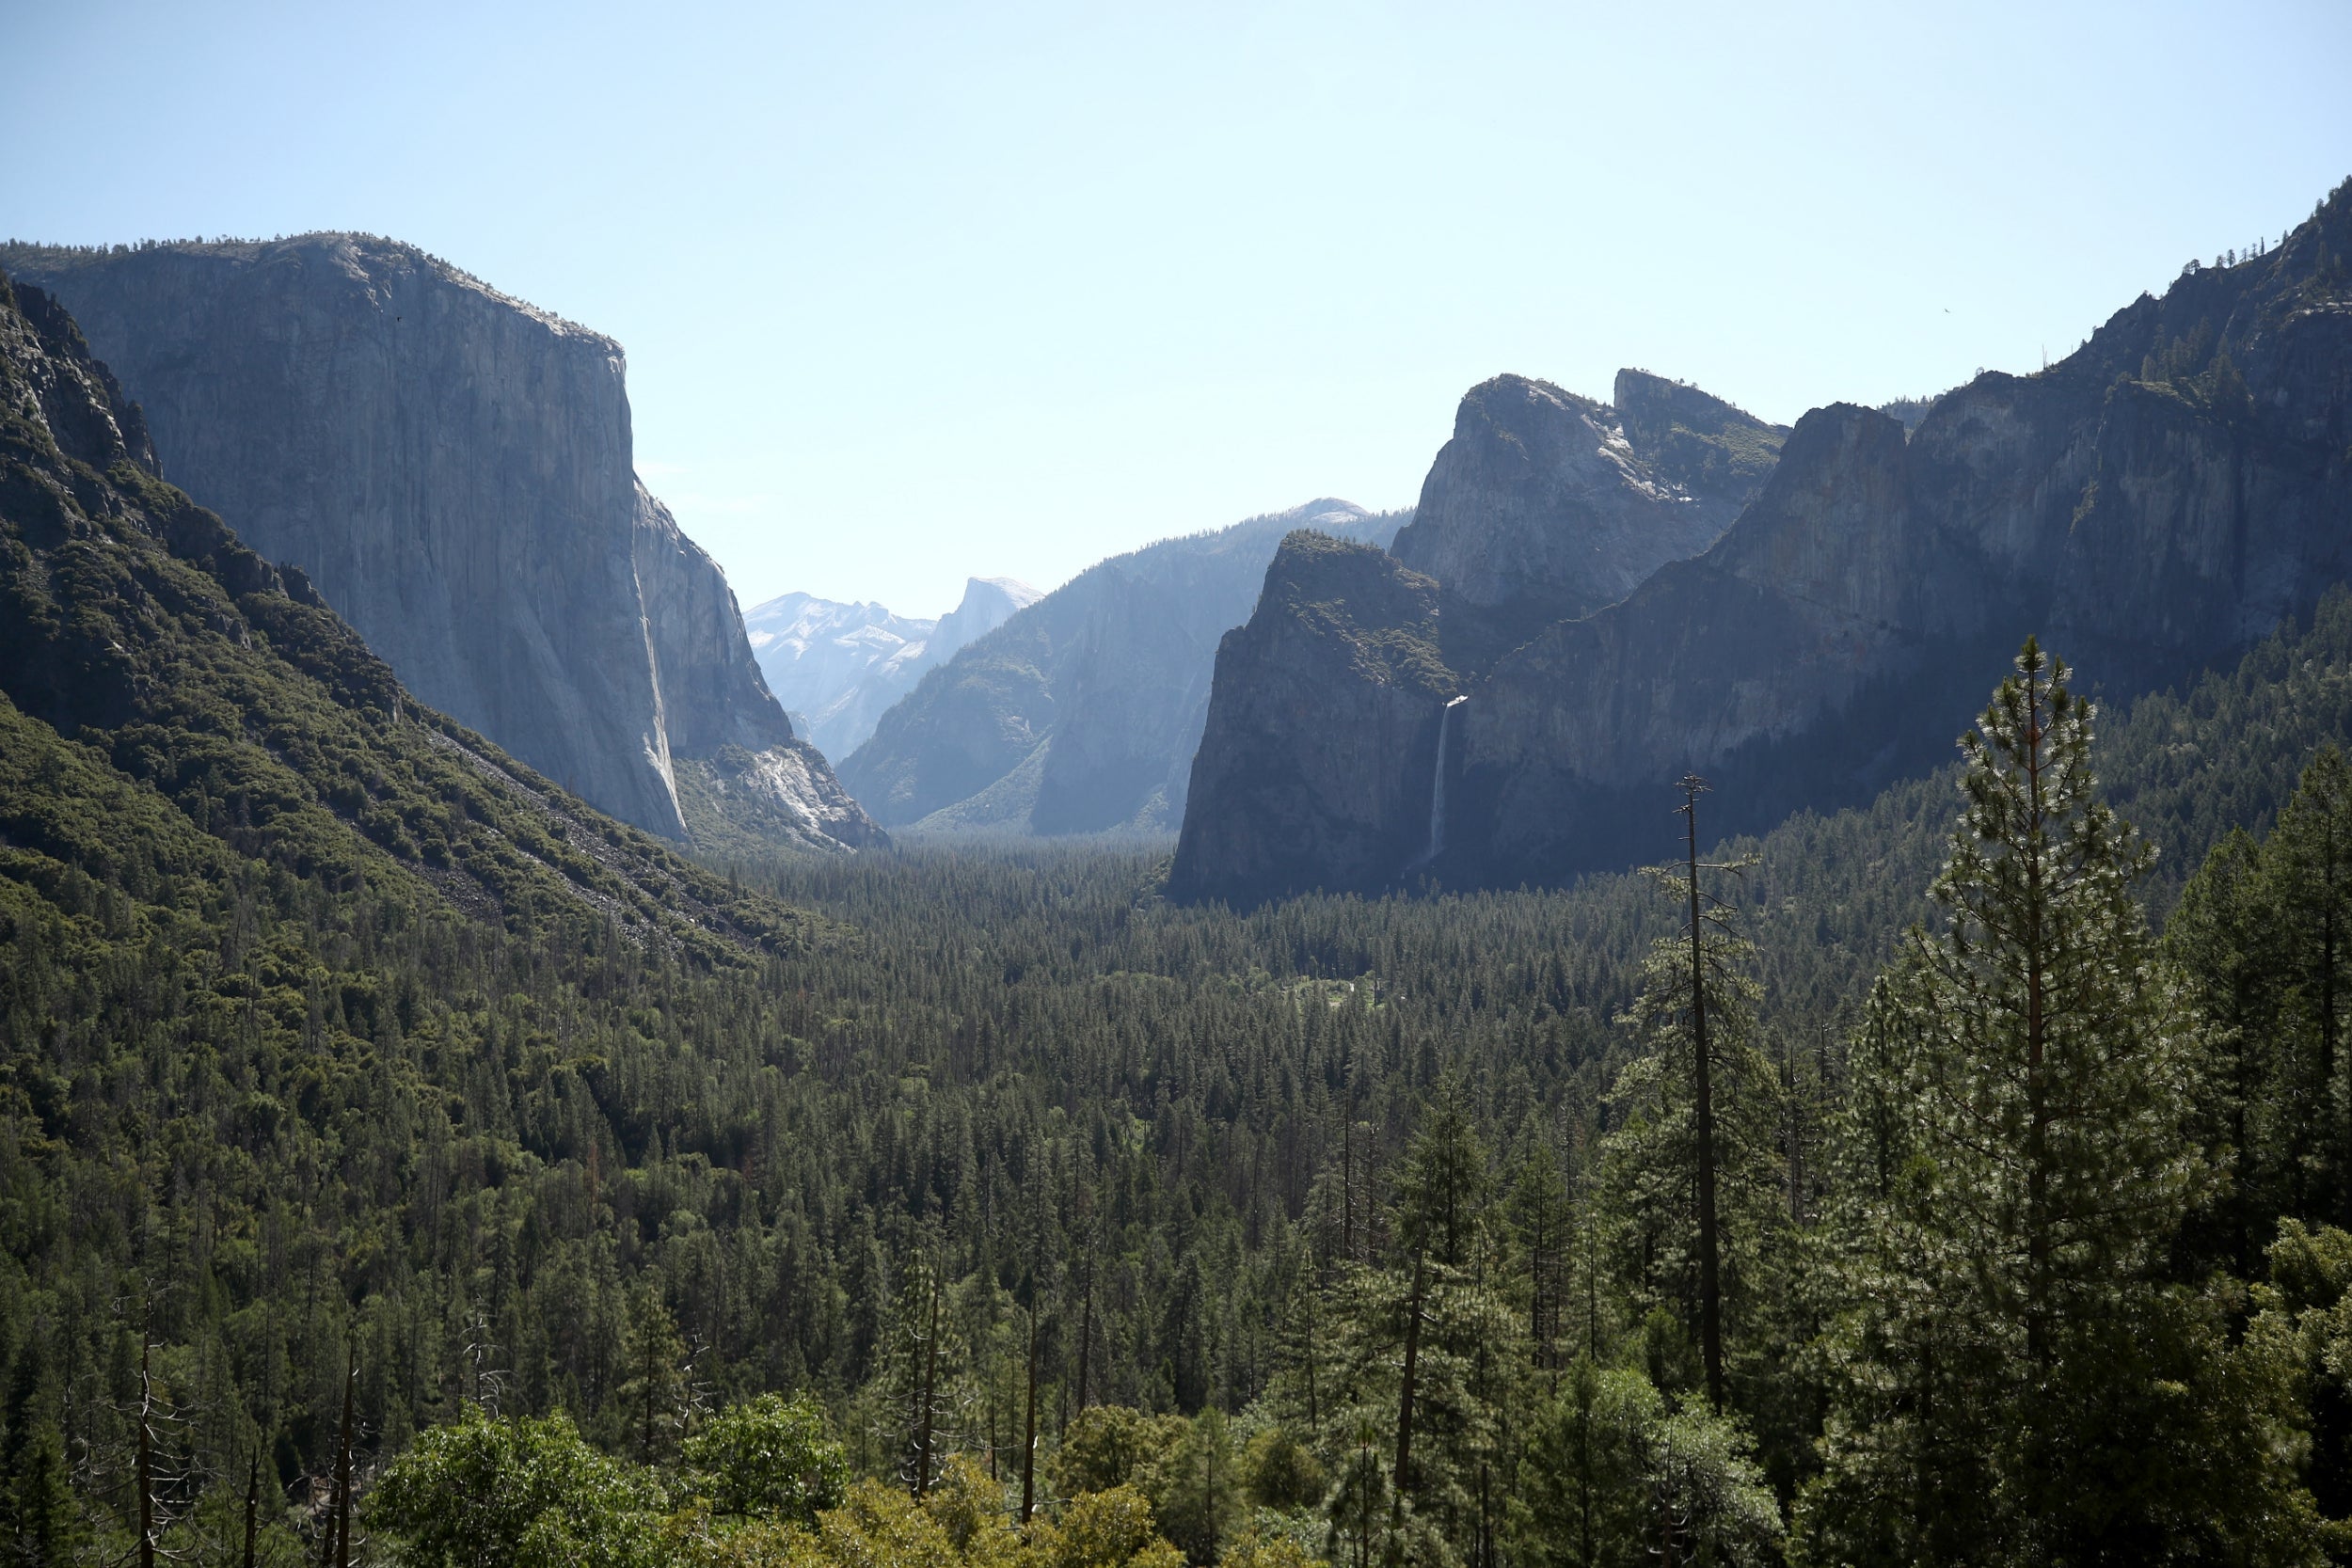 Yosemite National Park will be one of the more than 400 national park sites to benefit from the new bipartisan-supported bill